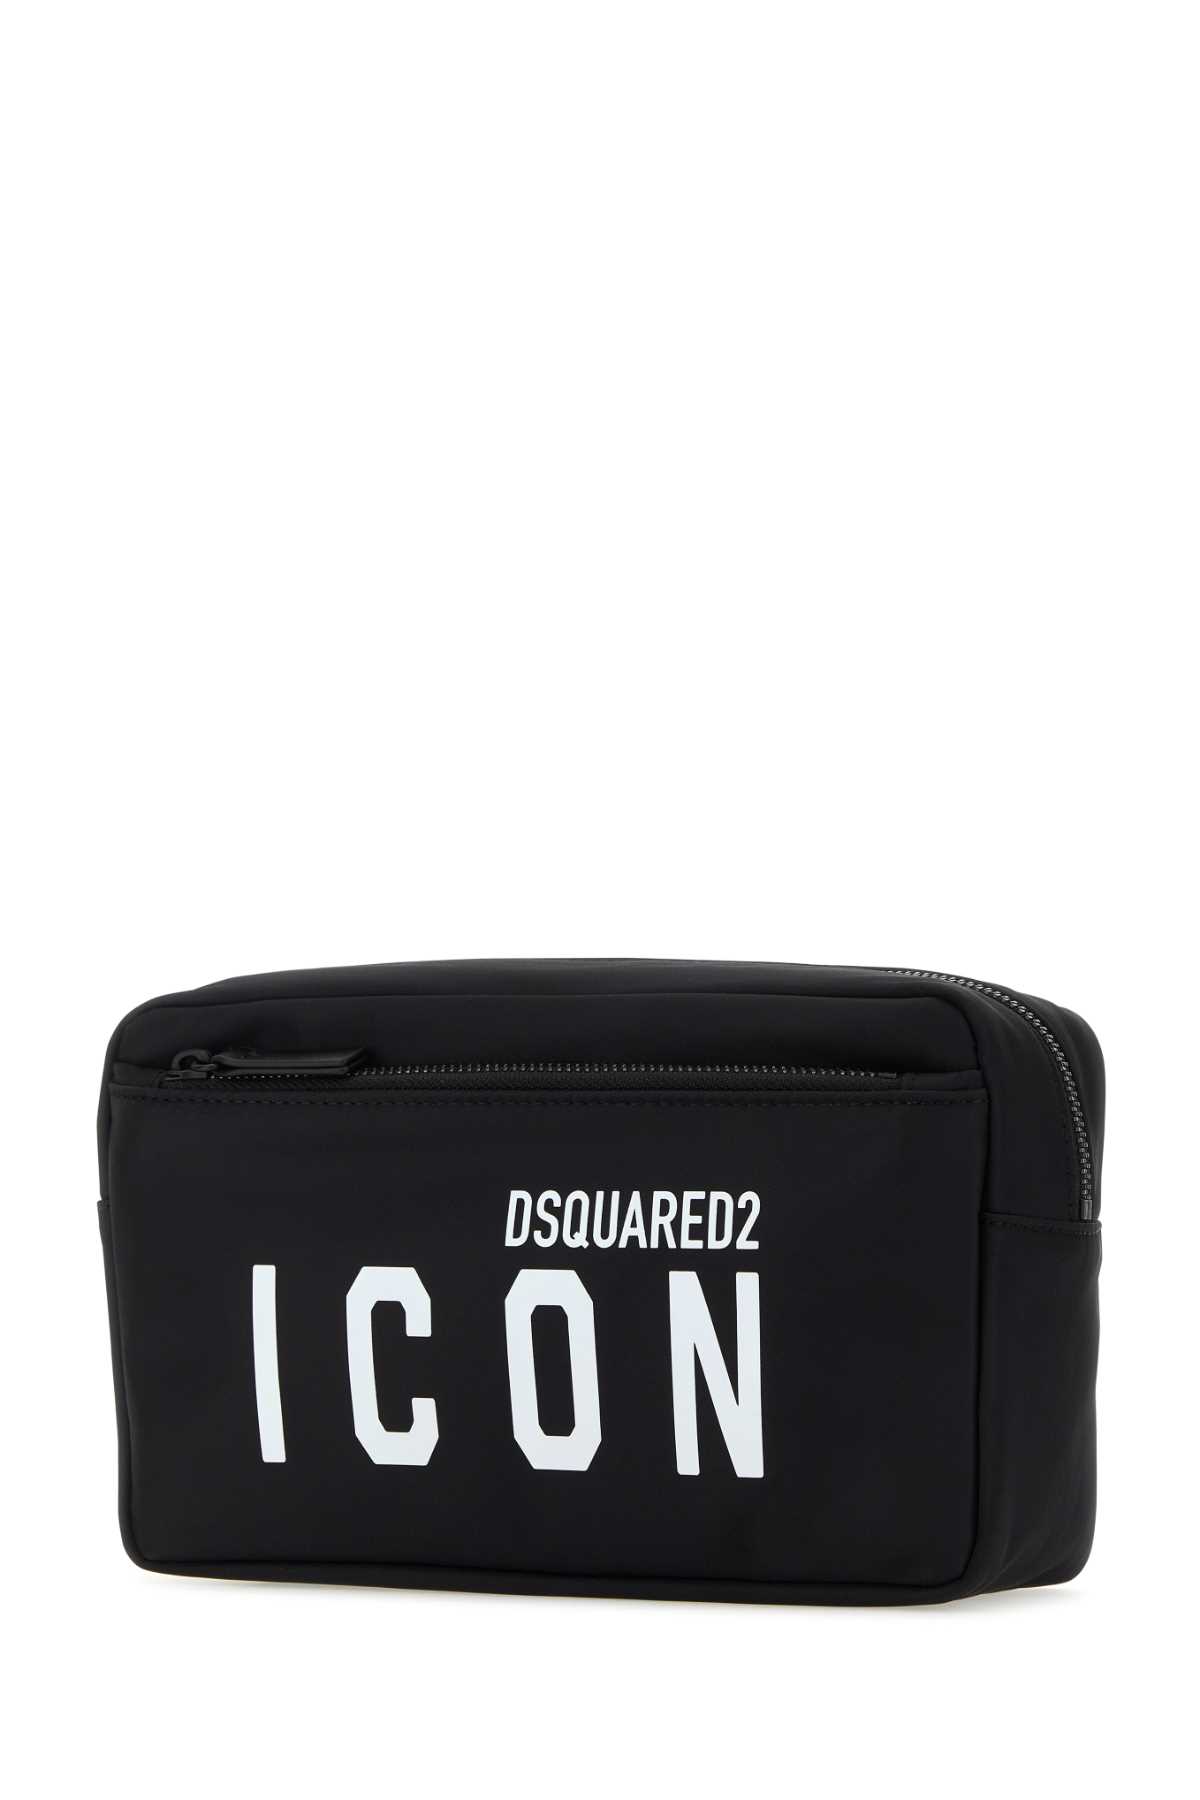 Dsquared2 Black Nylon Be Icon Beauty Case In M436